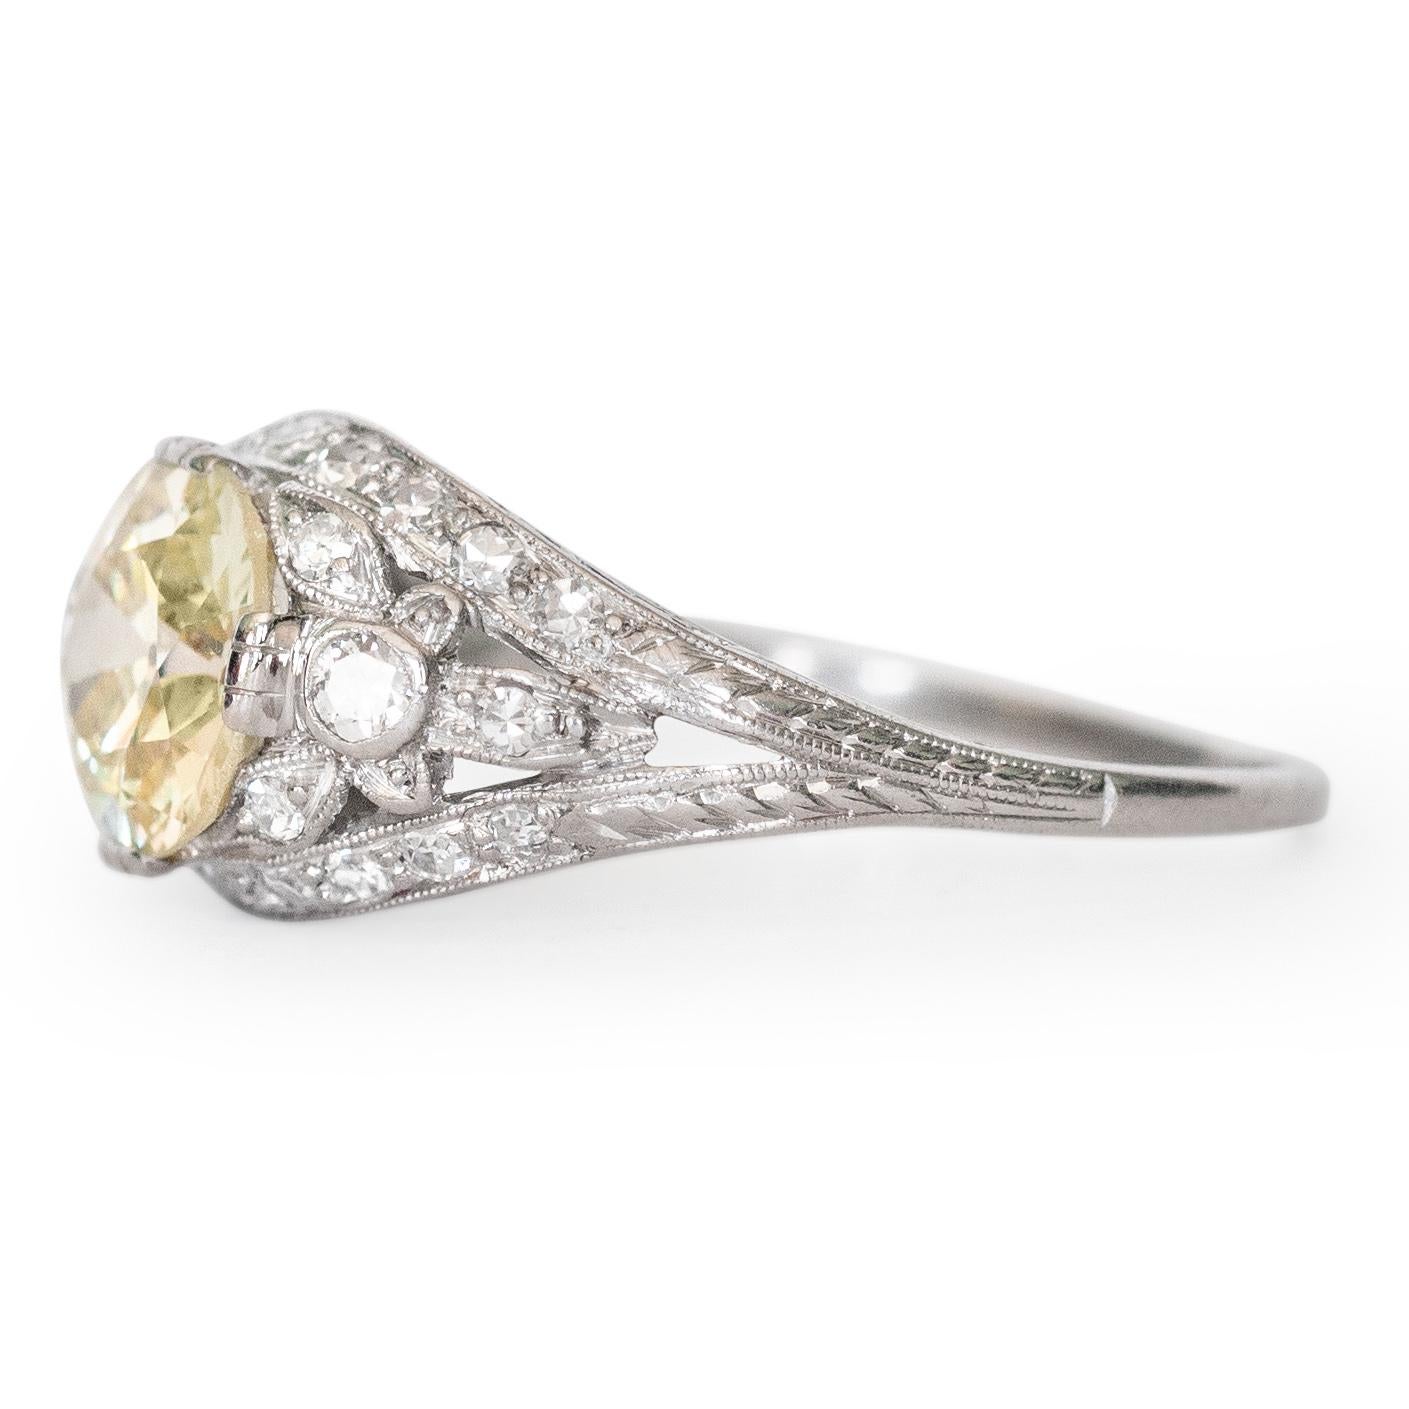 Ring Size: 9
Metal Type: Platinum [Hallmarked, and Tested]
Weight: 4 grams

Center Diamond Details:
Weight: 2.18 carat
Cut: Old European Brilliant
Color: Light Yellow (Q/R)
Clarity: SI1

Side Diamond Details:
Weight: .30 carat, total weight
Cut: Old